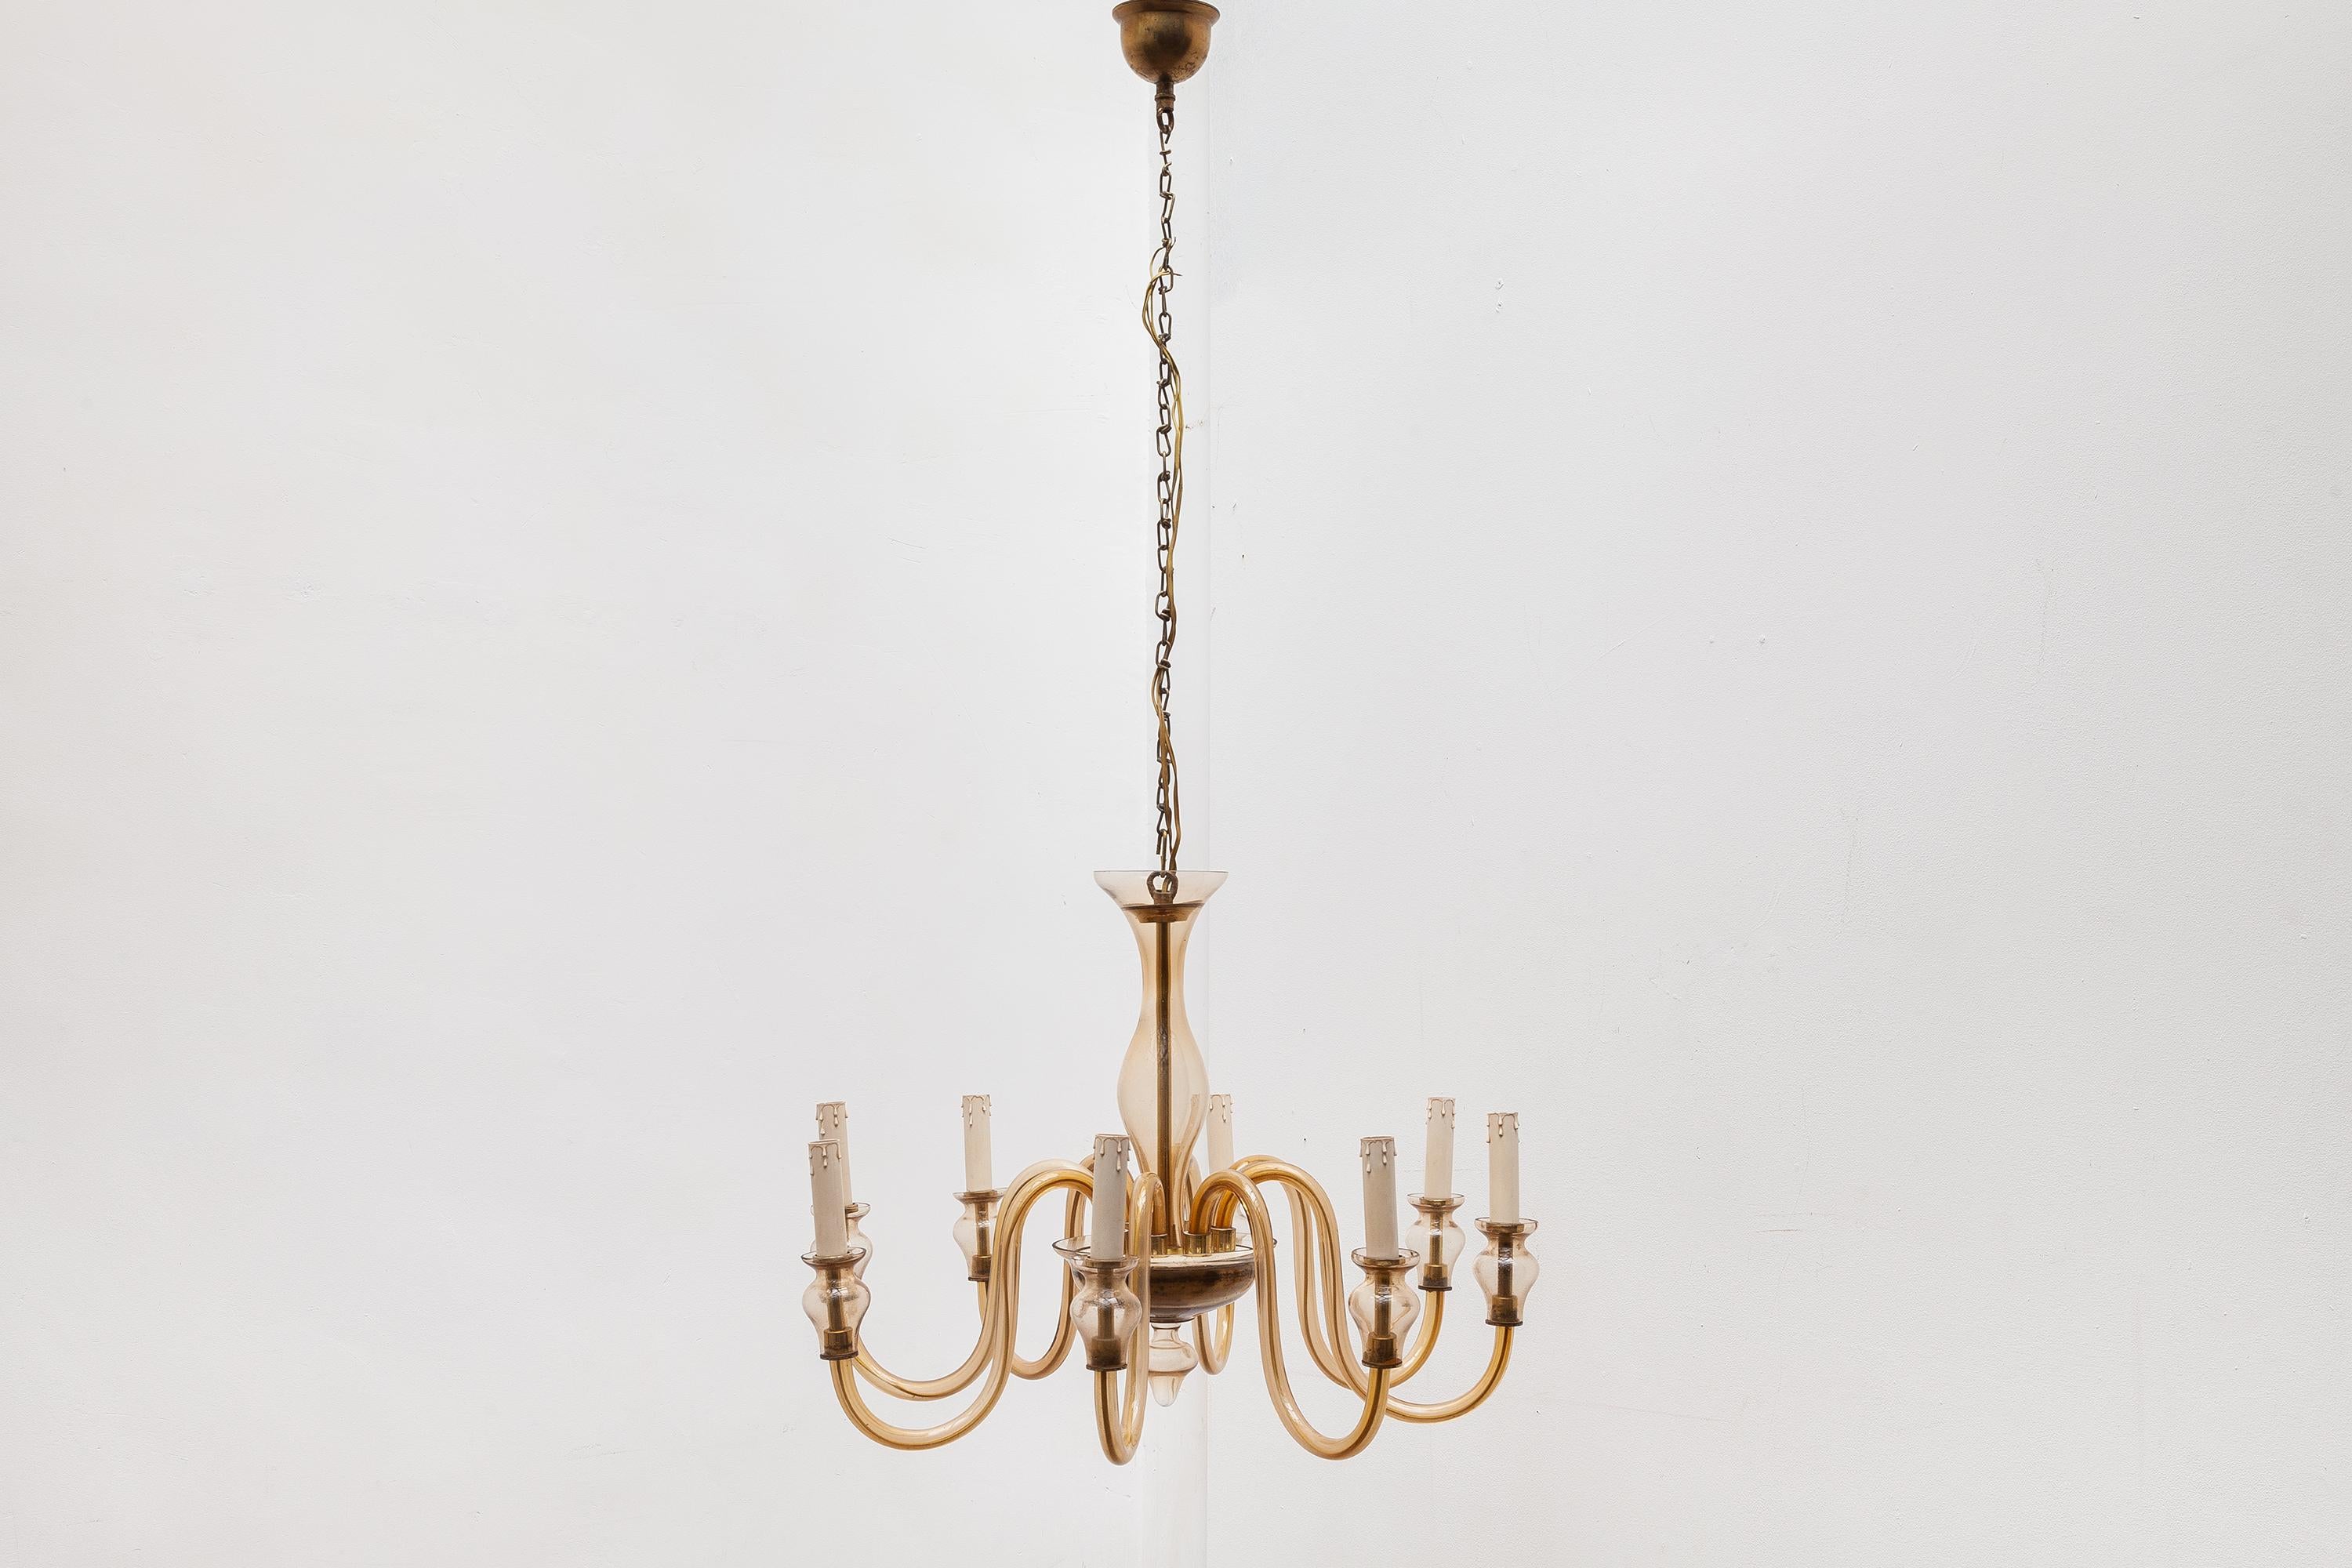 Antique Murano chandelier in a warm toned clear glass with brass accents. Lit by 8 bulbs.